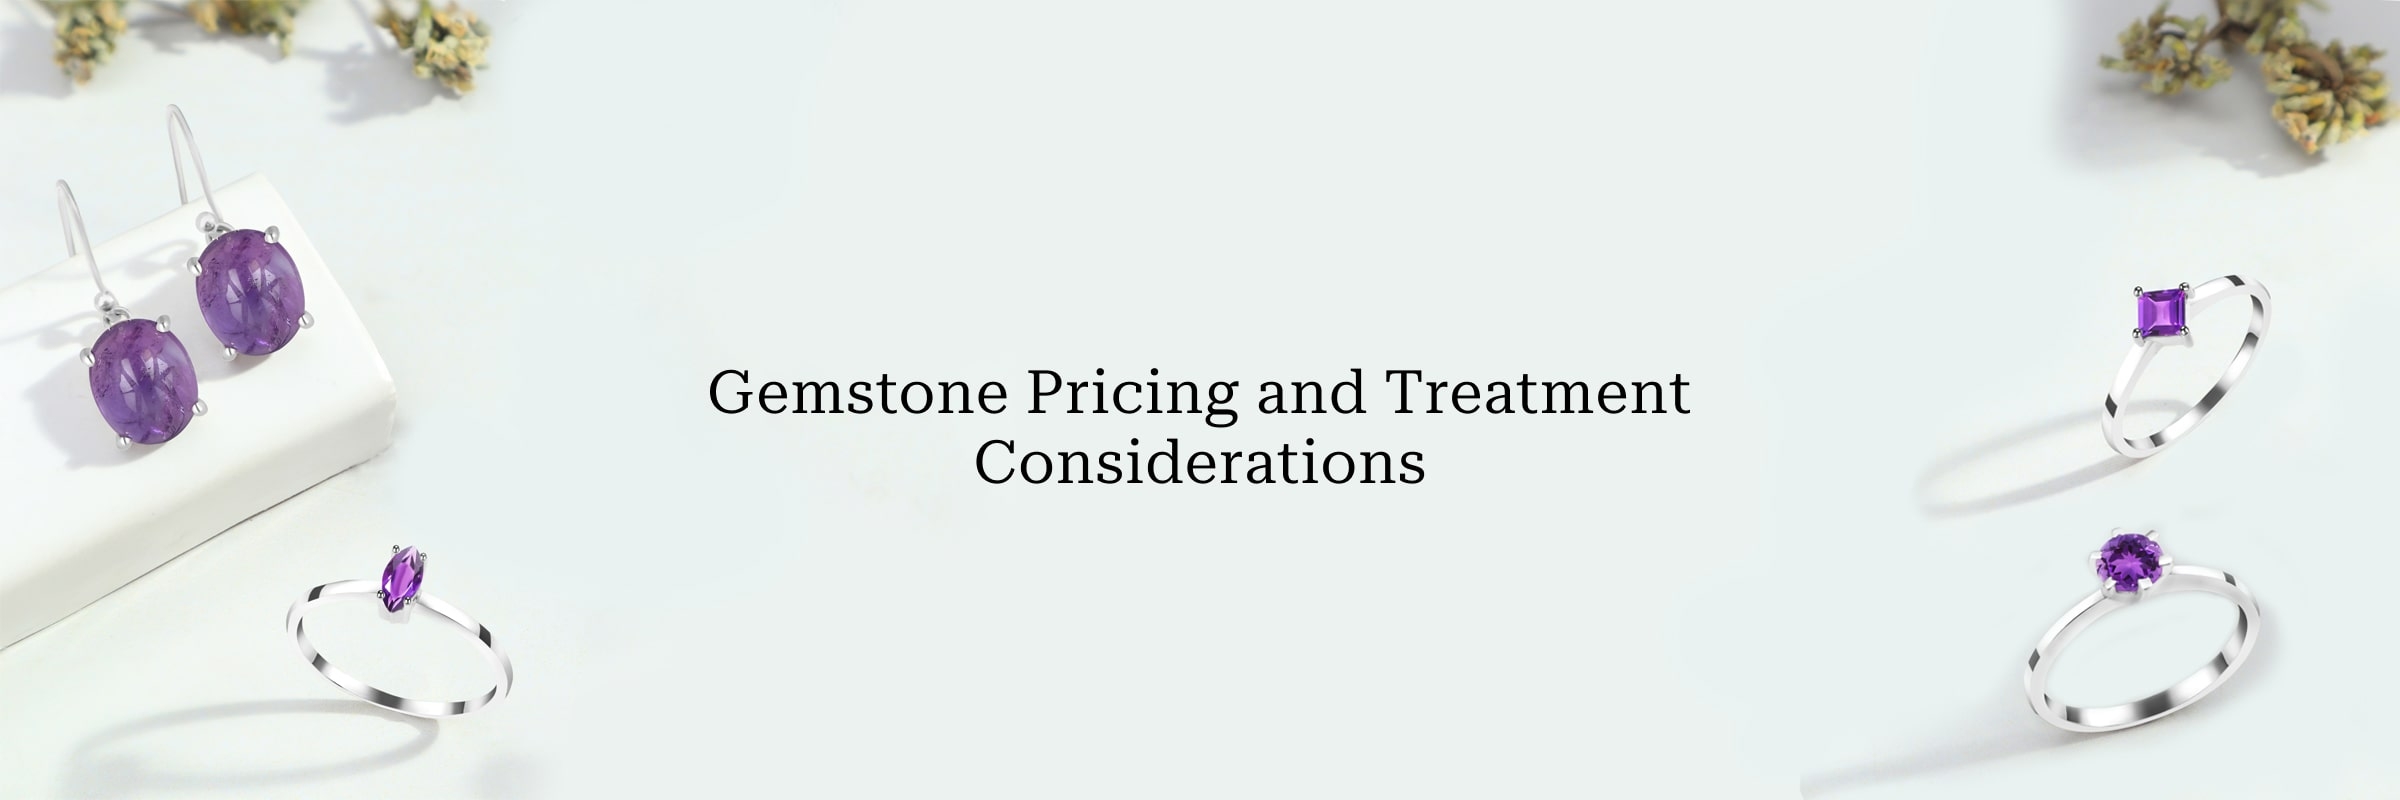 Treatment or Lack of Treatment and its effect on Gemstone Pricing